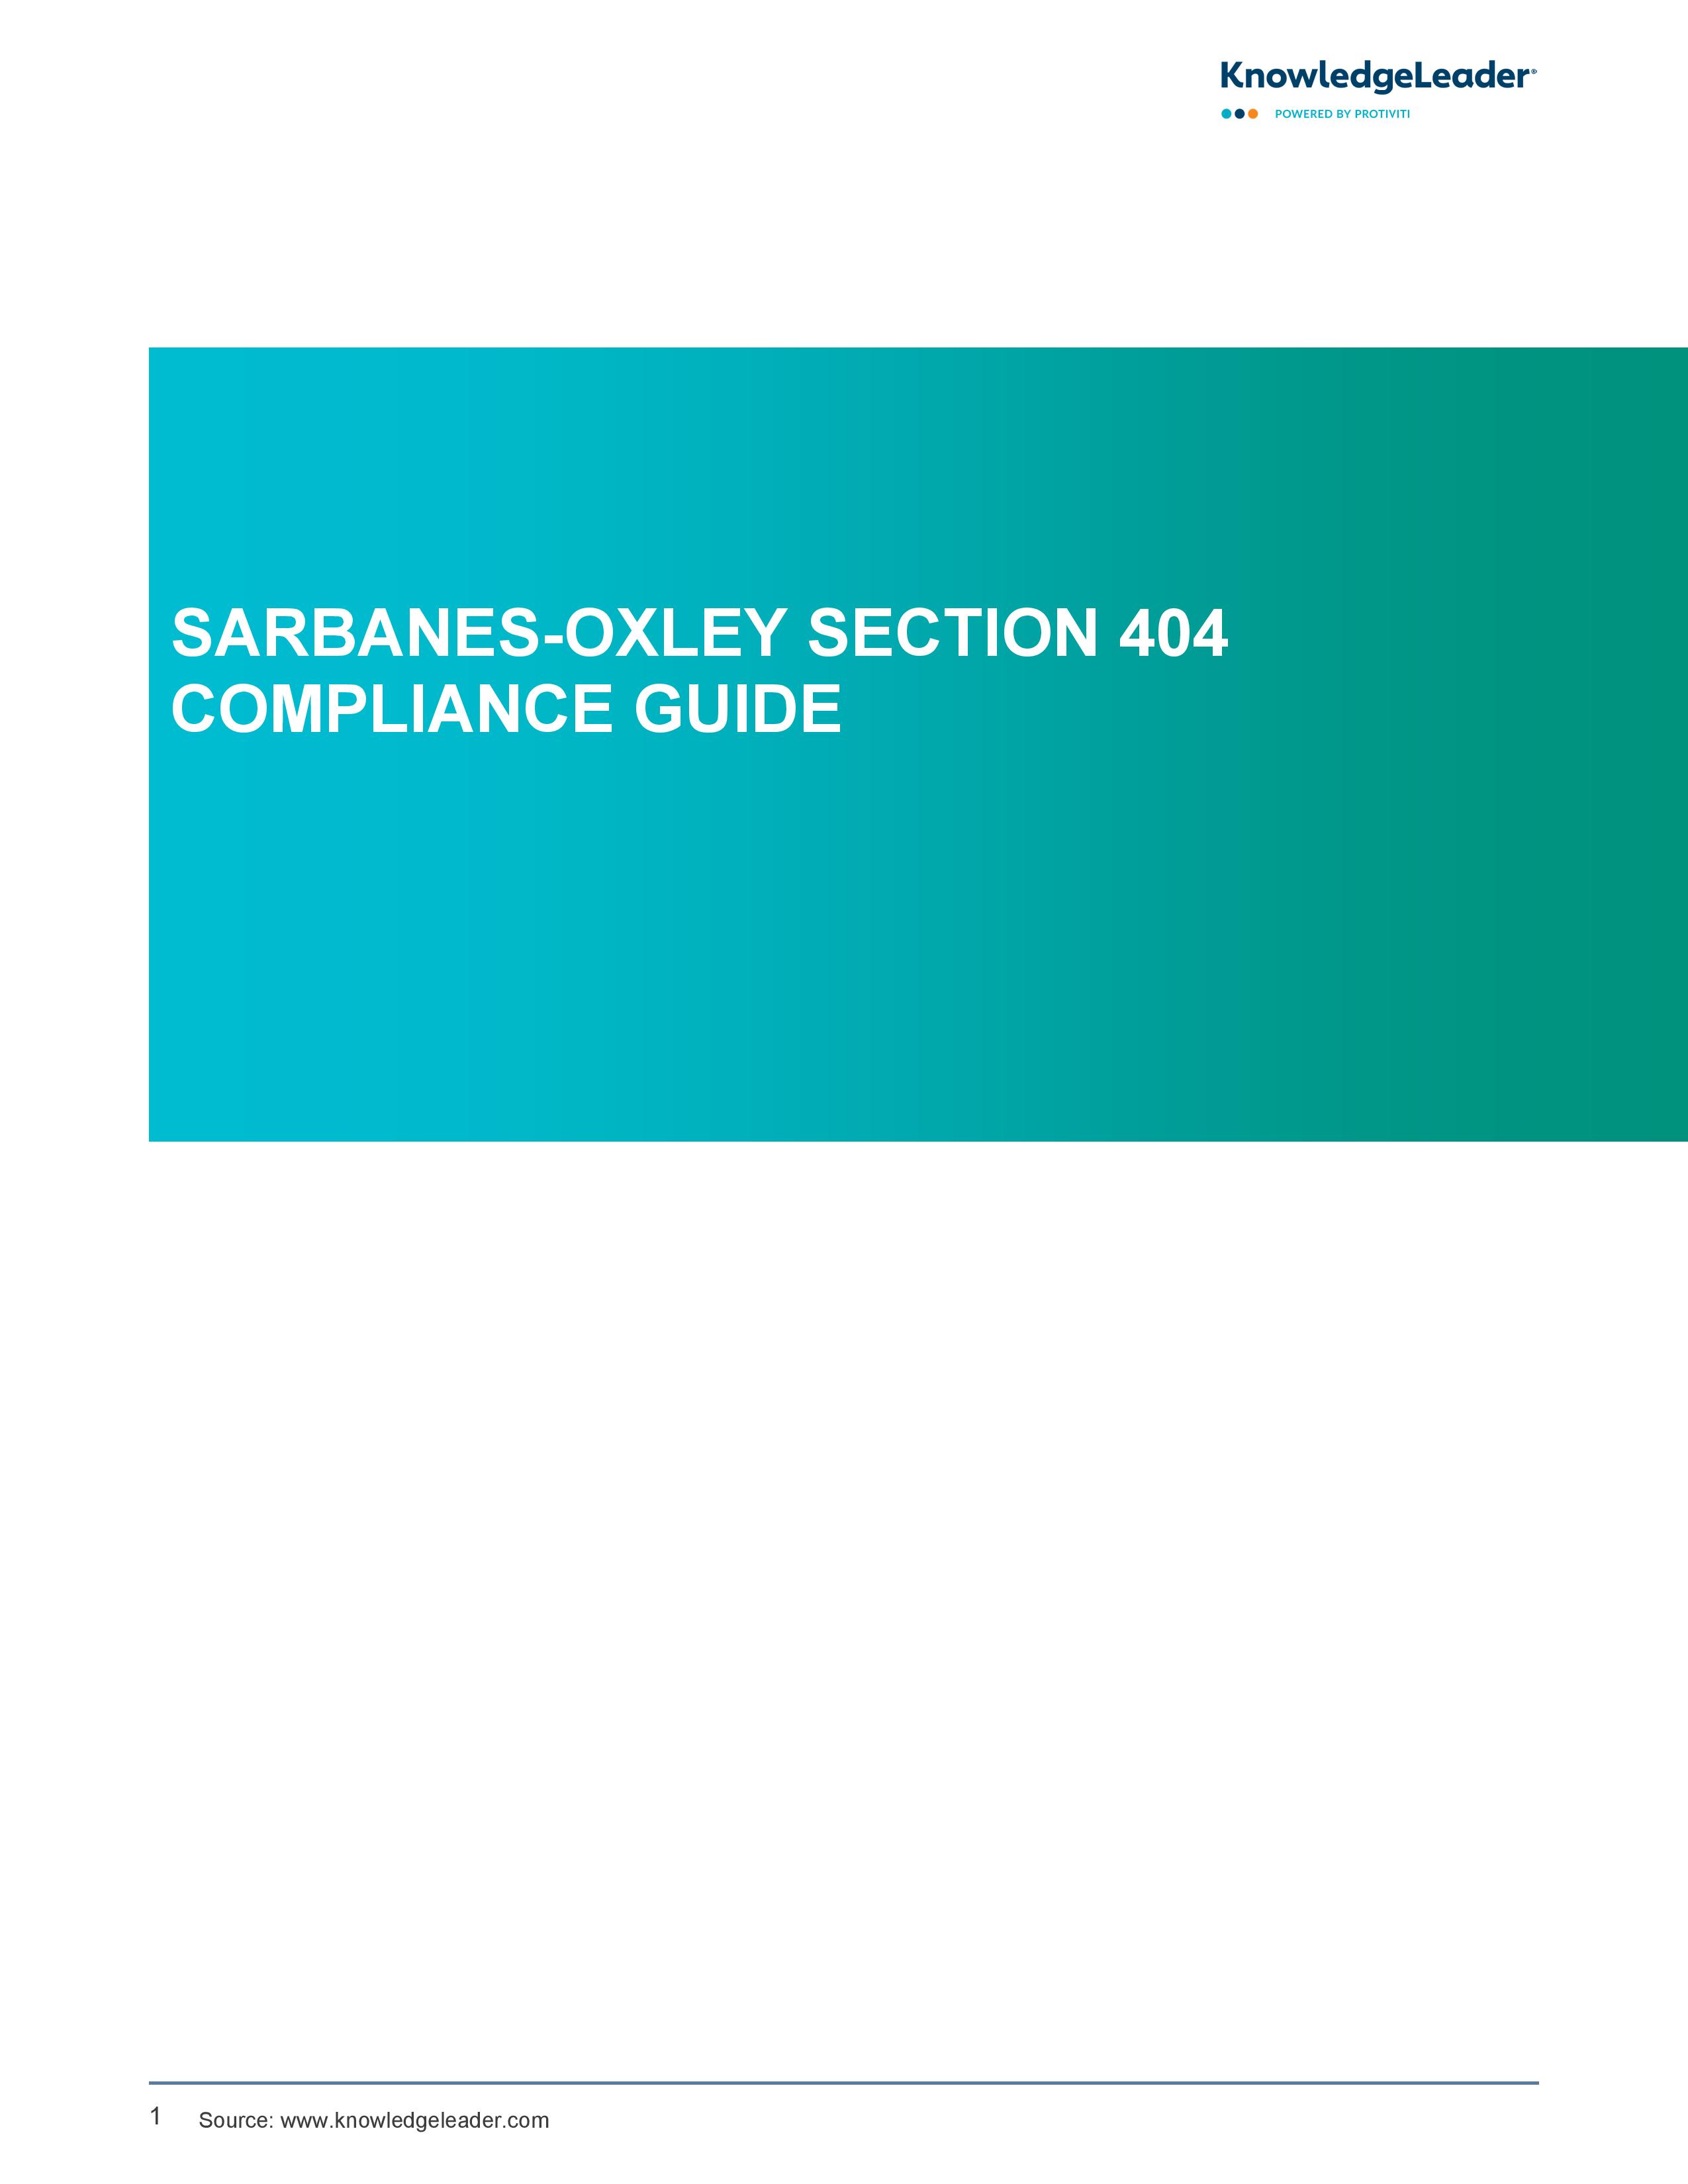 screenshot of the first page of Sarbanes-Oxley Section 404 Compliance Guide